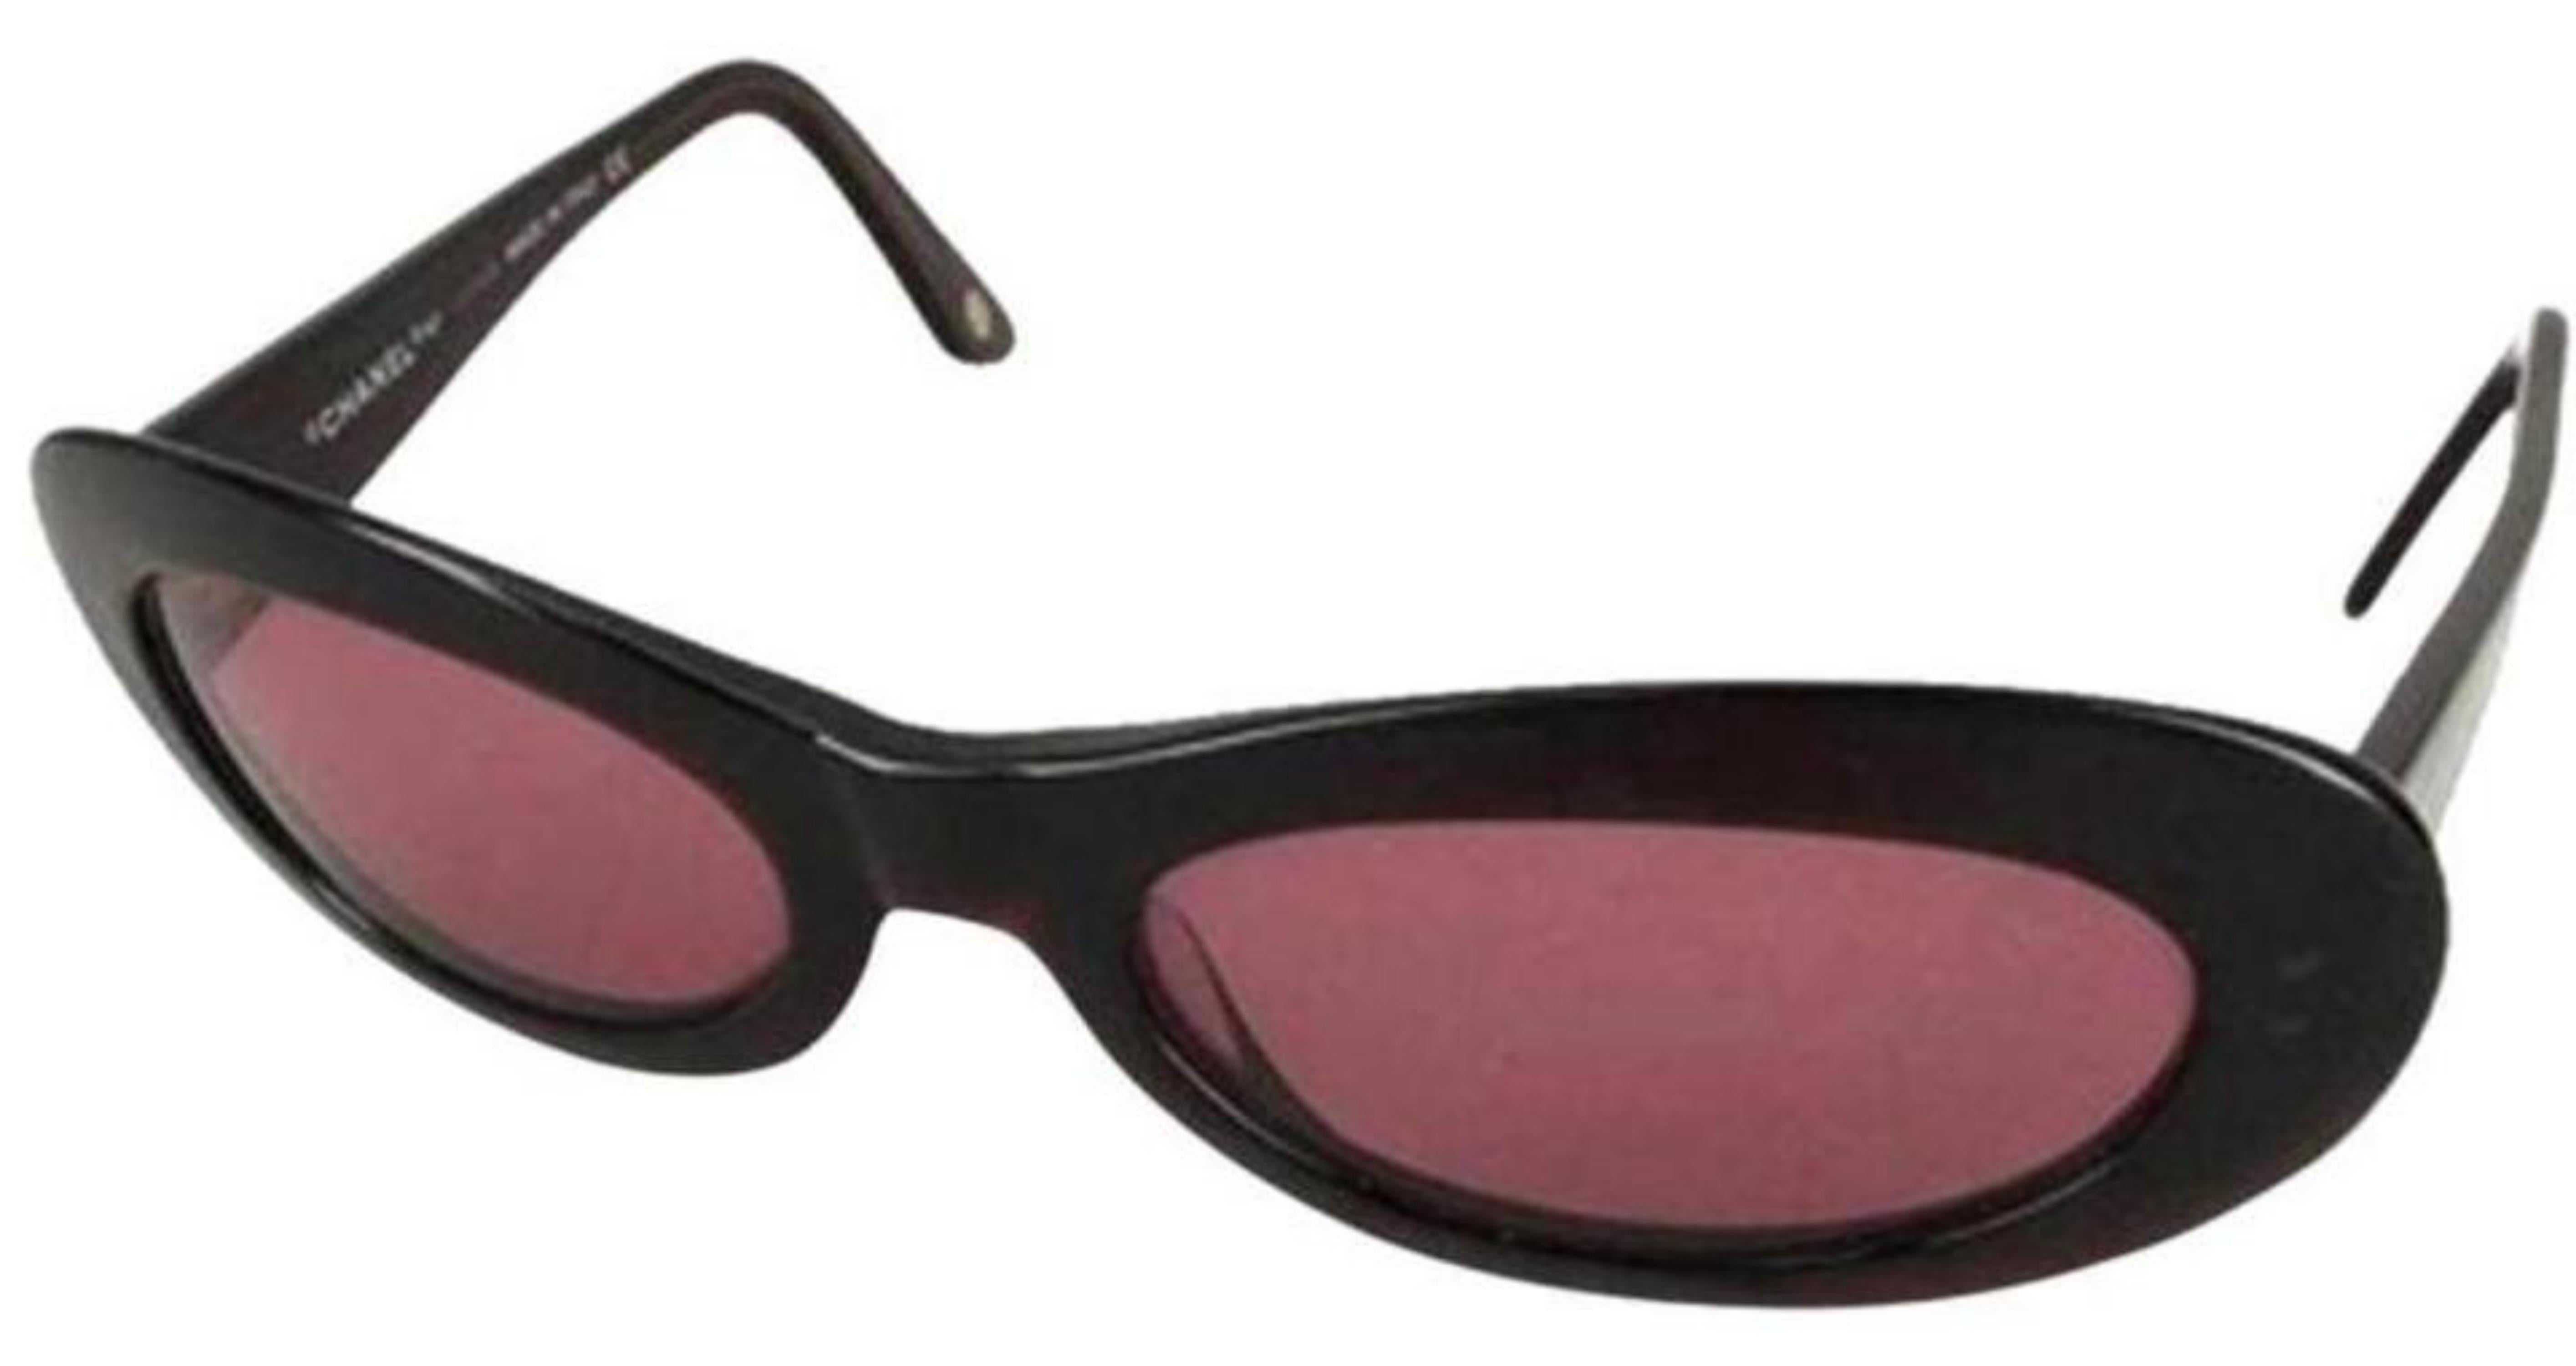 Chanel Burgundy Sunglasses c.539/64
Previously owned.
Made In: Italy
Frame and lenses have scratches. Sunglasses case has odor.
This item does not come with any other extra accessories.
Please review measurements and photos to see if this is the